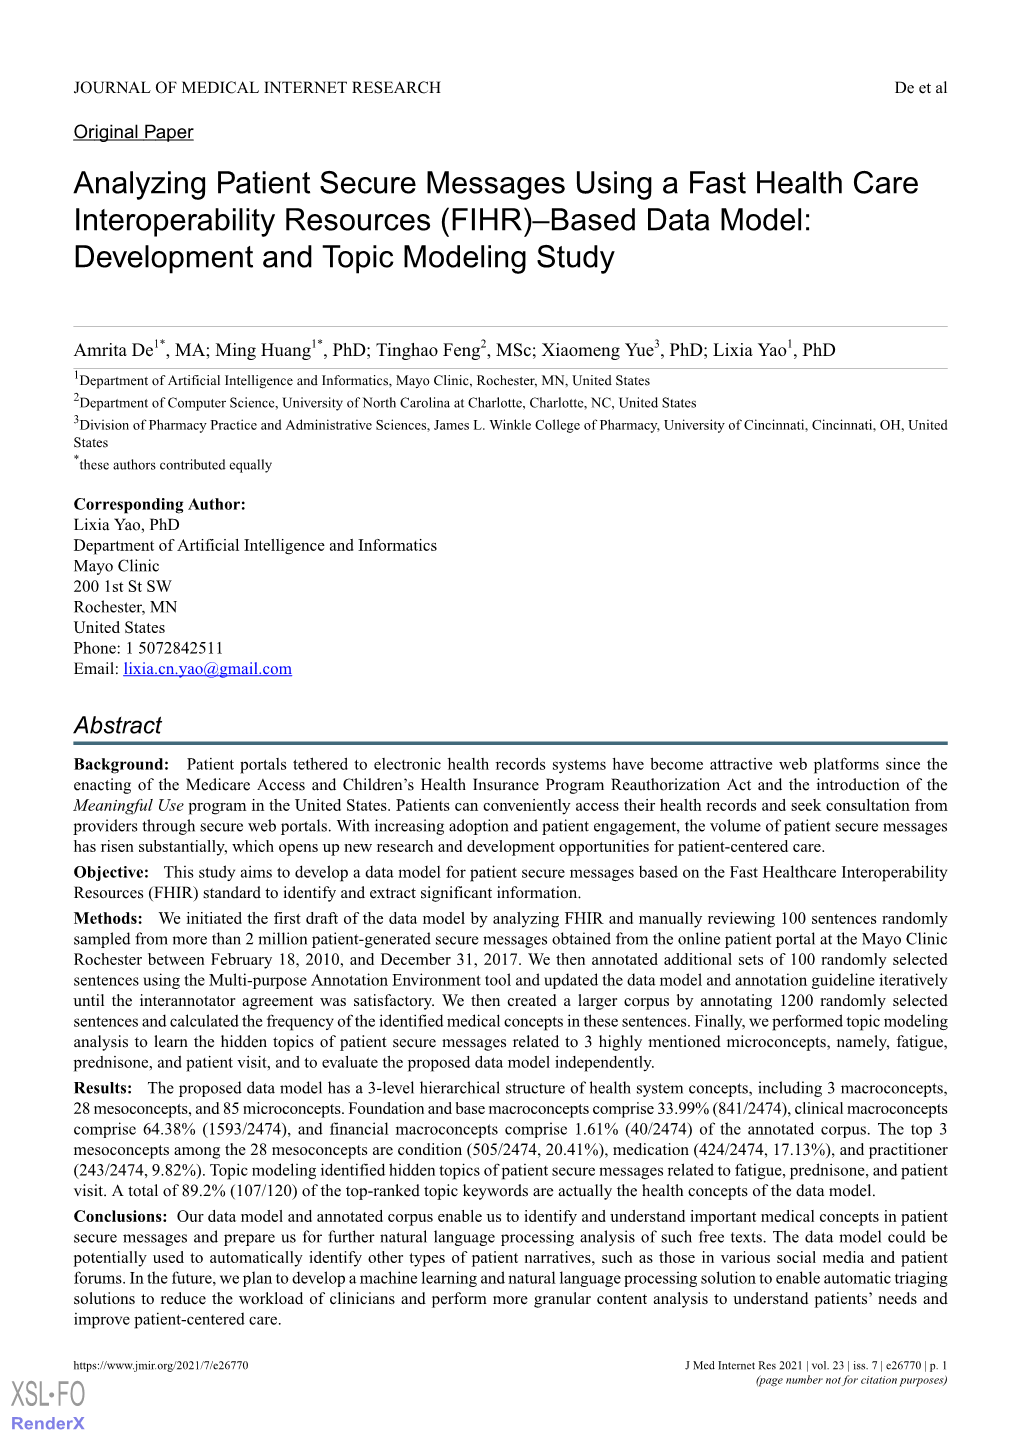 Analyzing Patient Secure Messages Using a Fast Health Care Interoperability Resources (FIHR)–Based Data Model: Development and Topic Modeling Study